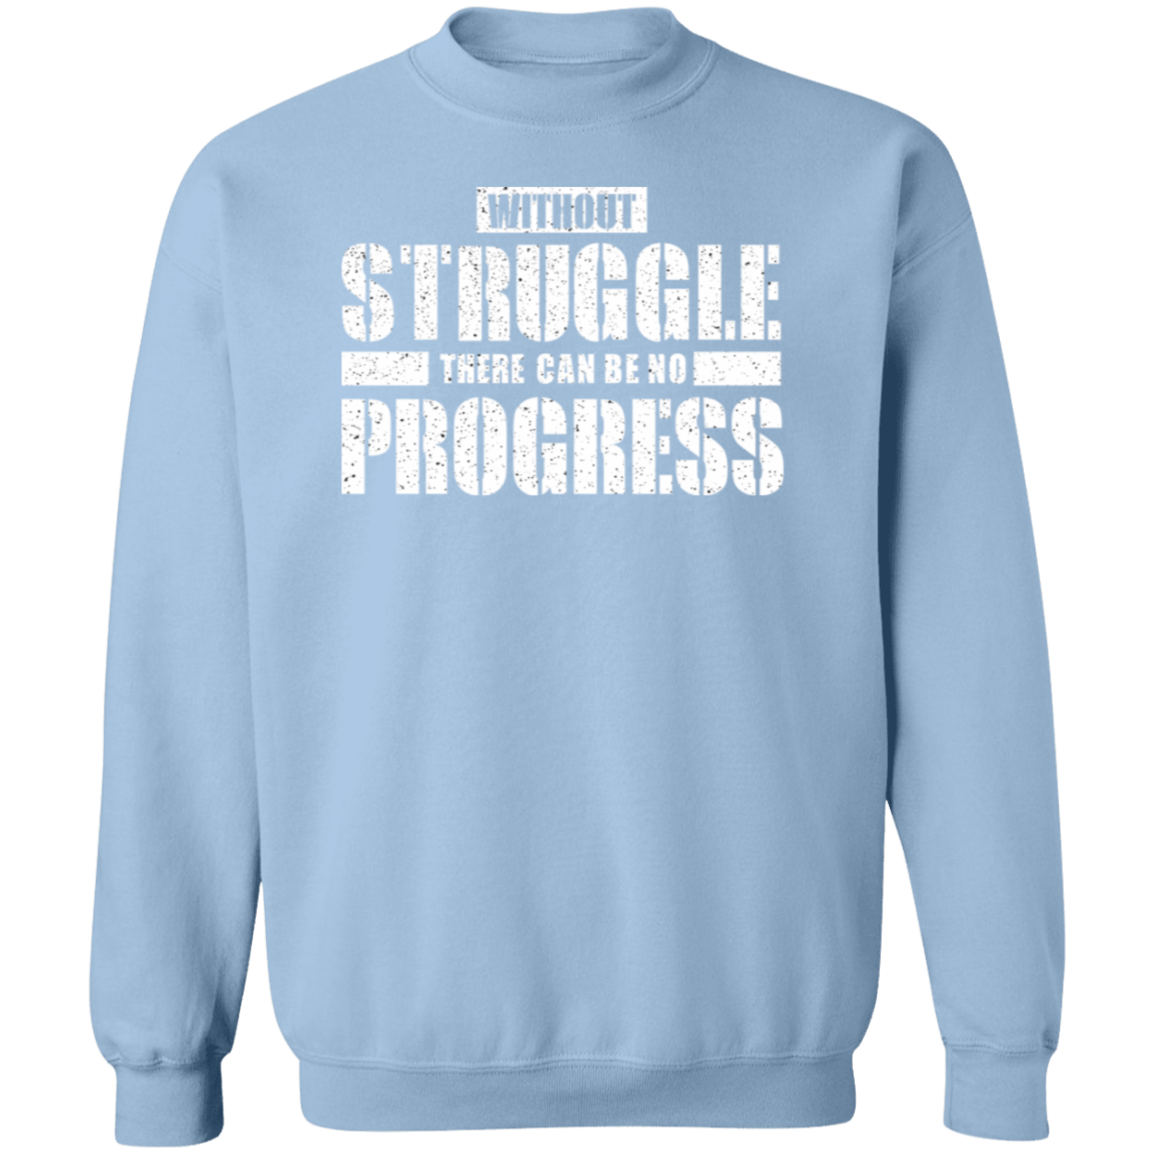 Without Struggle There can be no progress Premium Crew Neck Sweatshirt - Game Day Getup